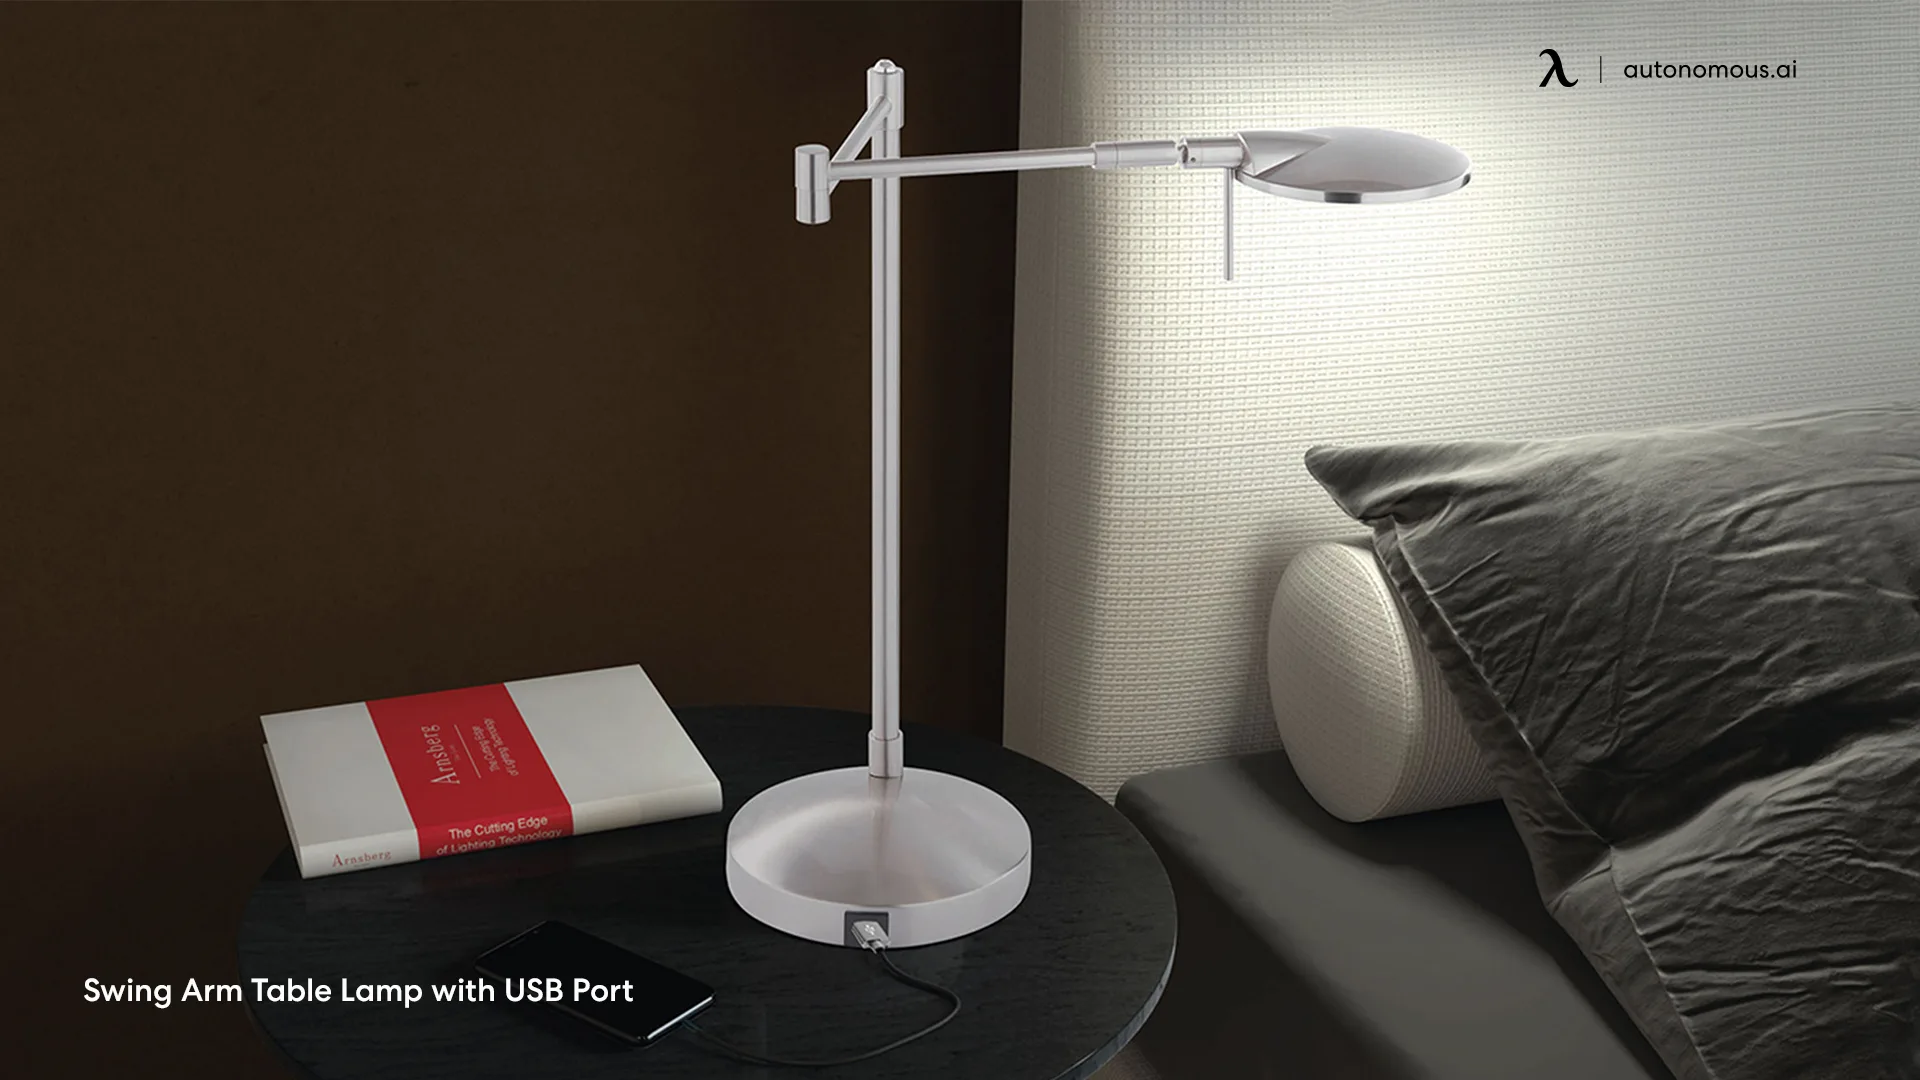 Swing Arm Table Lamp with USB Port